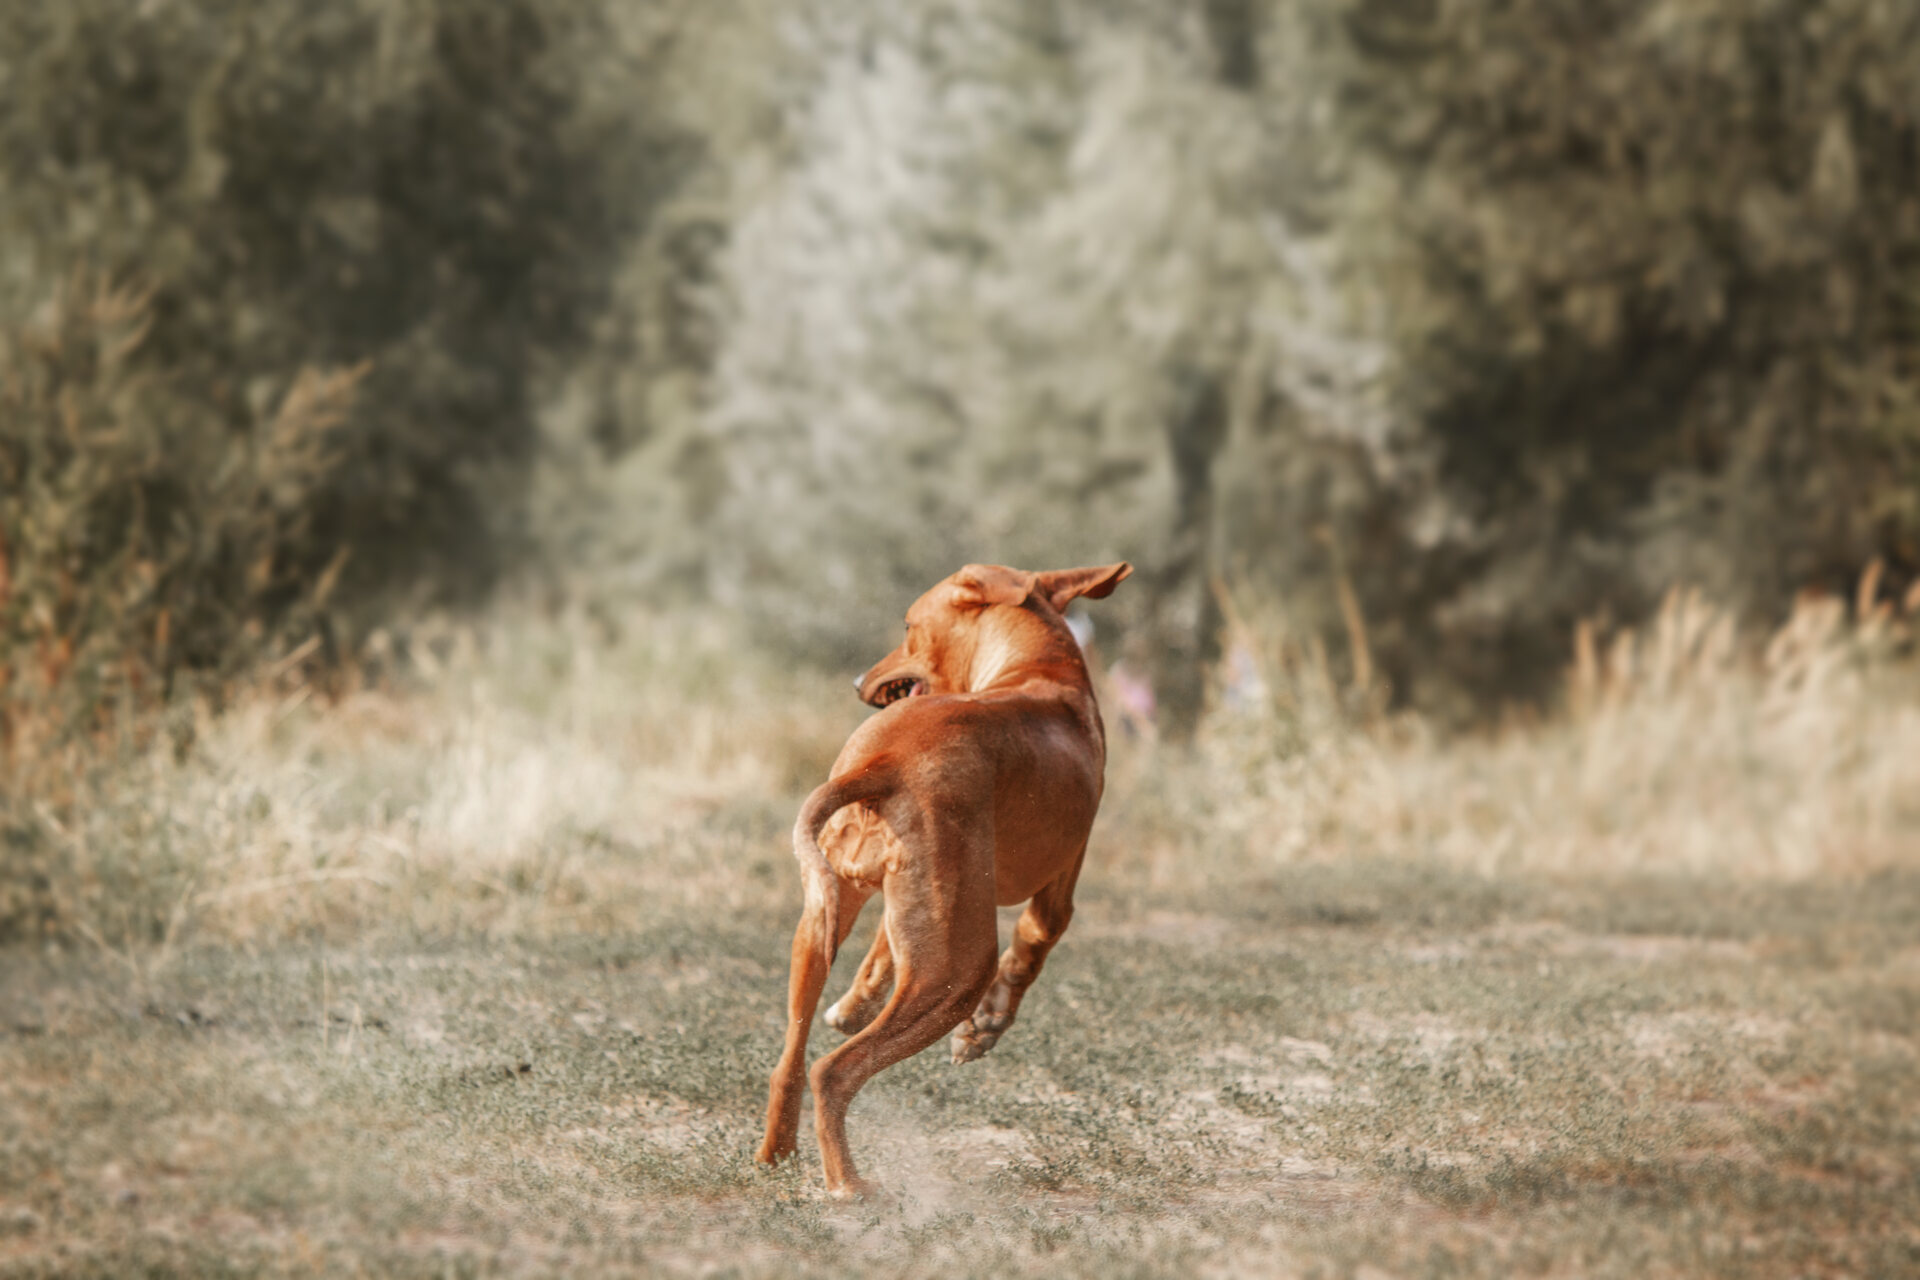 A dog running away into a forest